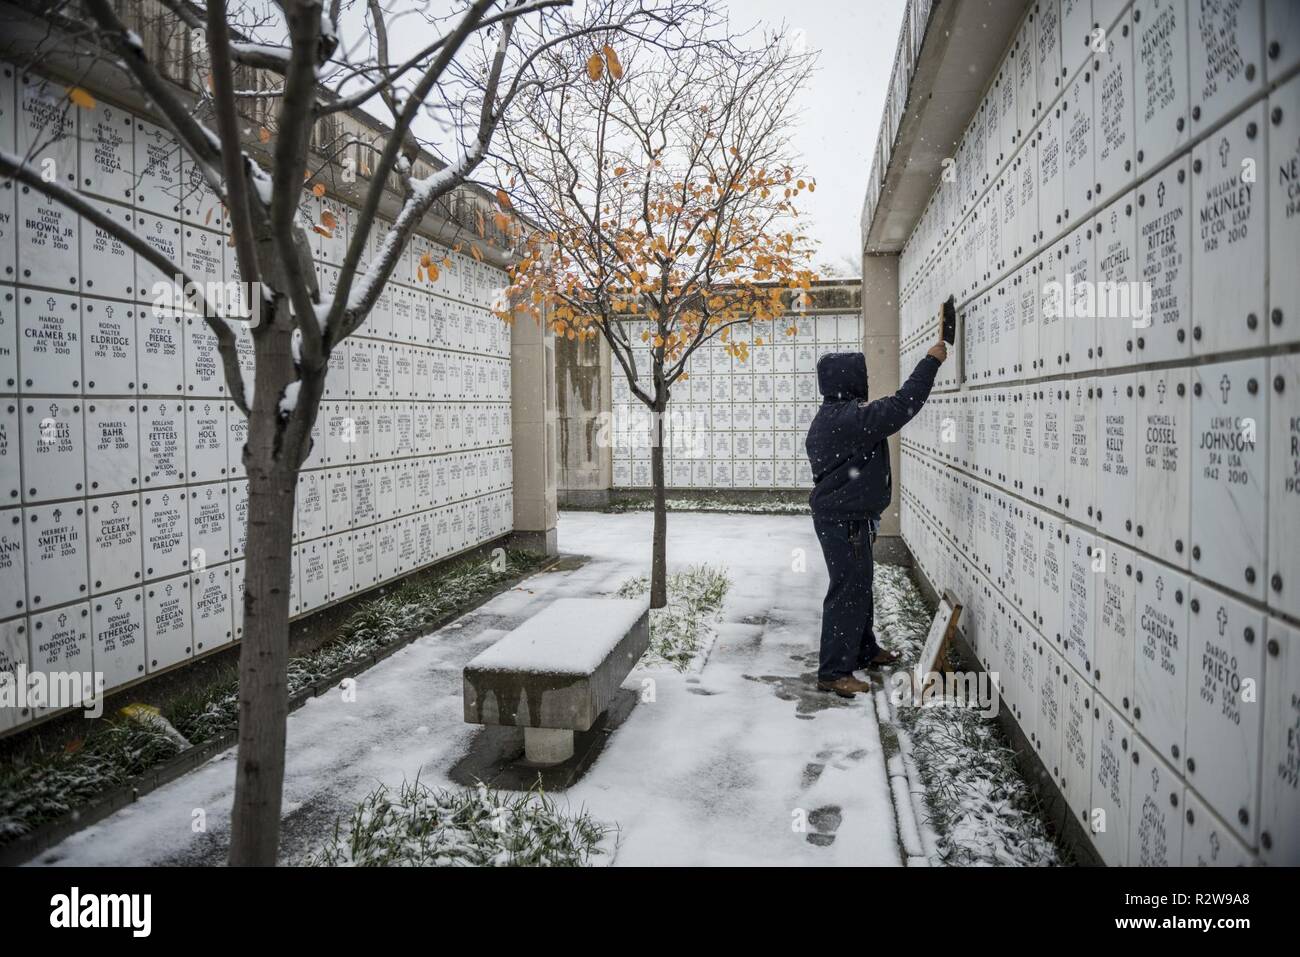 A cemetery caretaker cleans off an open niche cover  in Columbarium Court 7 at Arlington National Cemetery, Arlington, Virginia, Nov. 15, 2018. This was the first snow fall of the season. Stock Photo